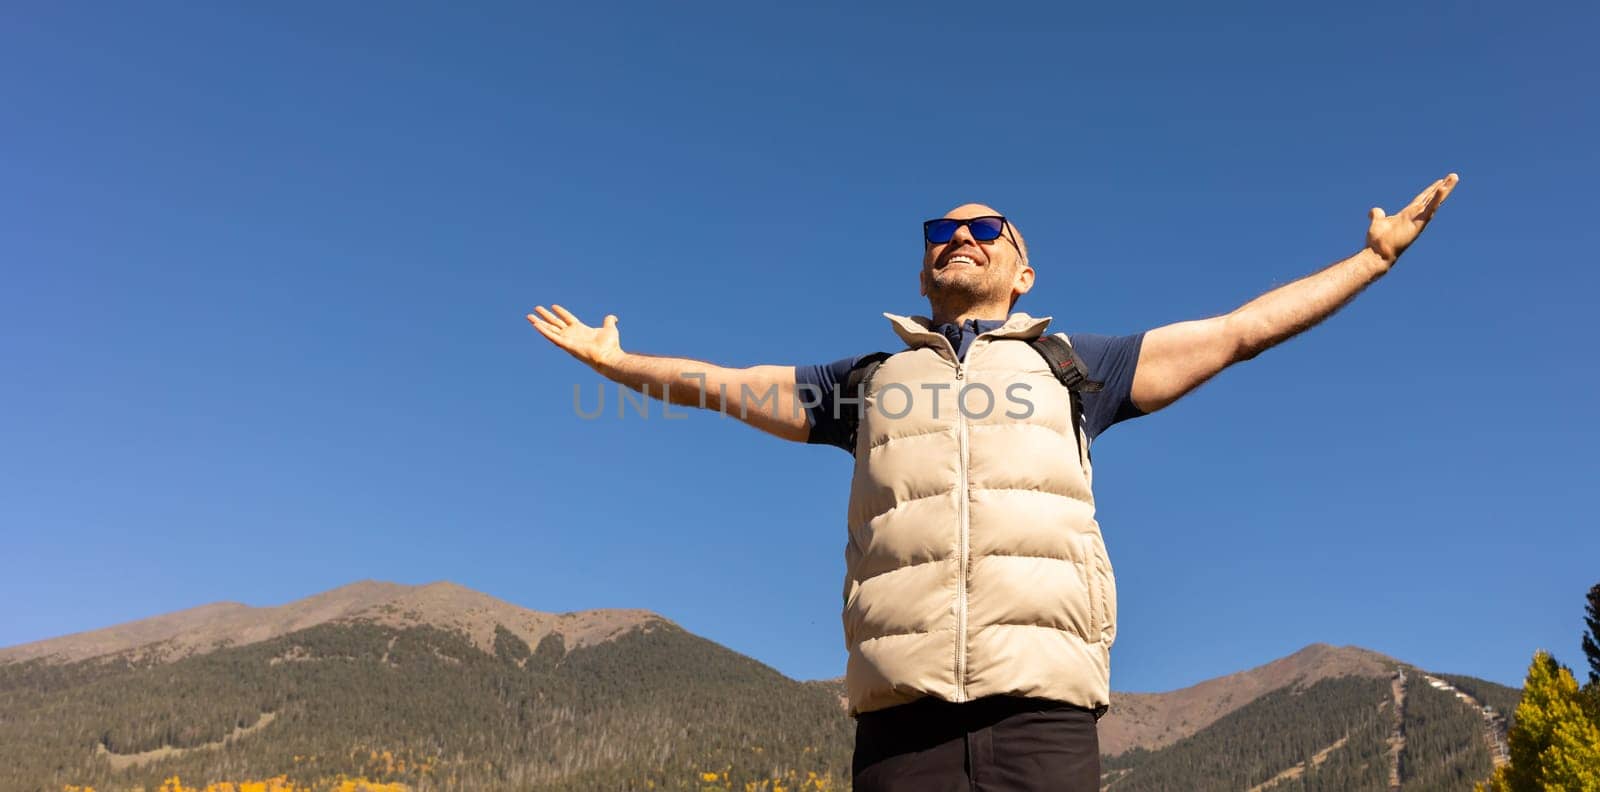 Banner Handsome 40 yo Male Tourist with Open Arms, Mountains, Blue Sky on Background. Male Hiker with Backpack Does Hiking, Trekking In Autumn Nature. Travel, Active Lifestyle Copy Space. Horizontal.